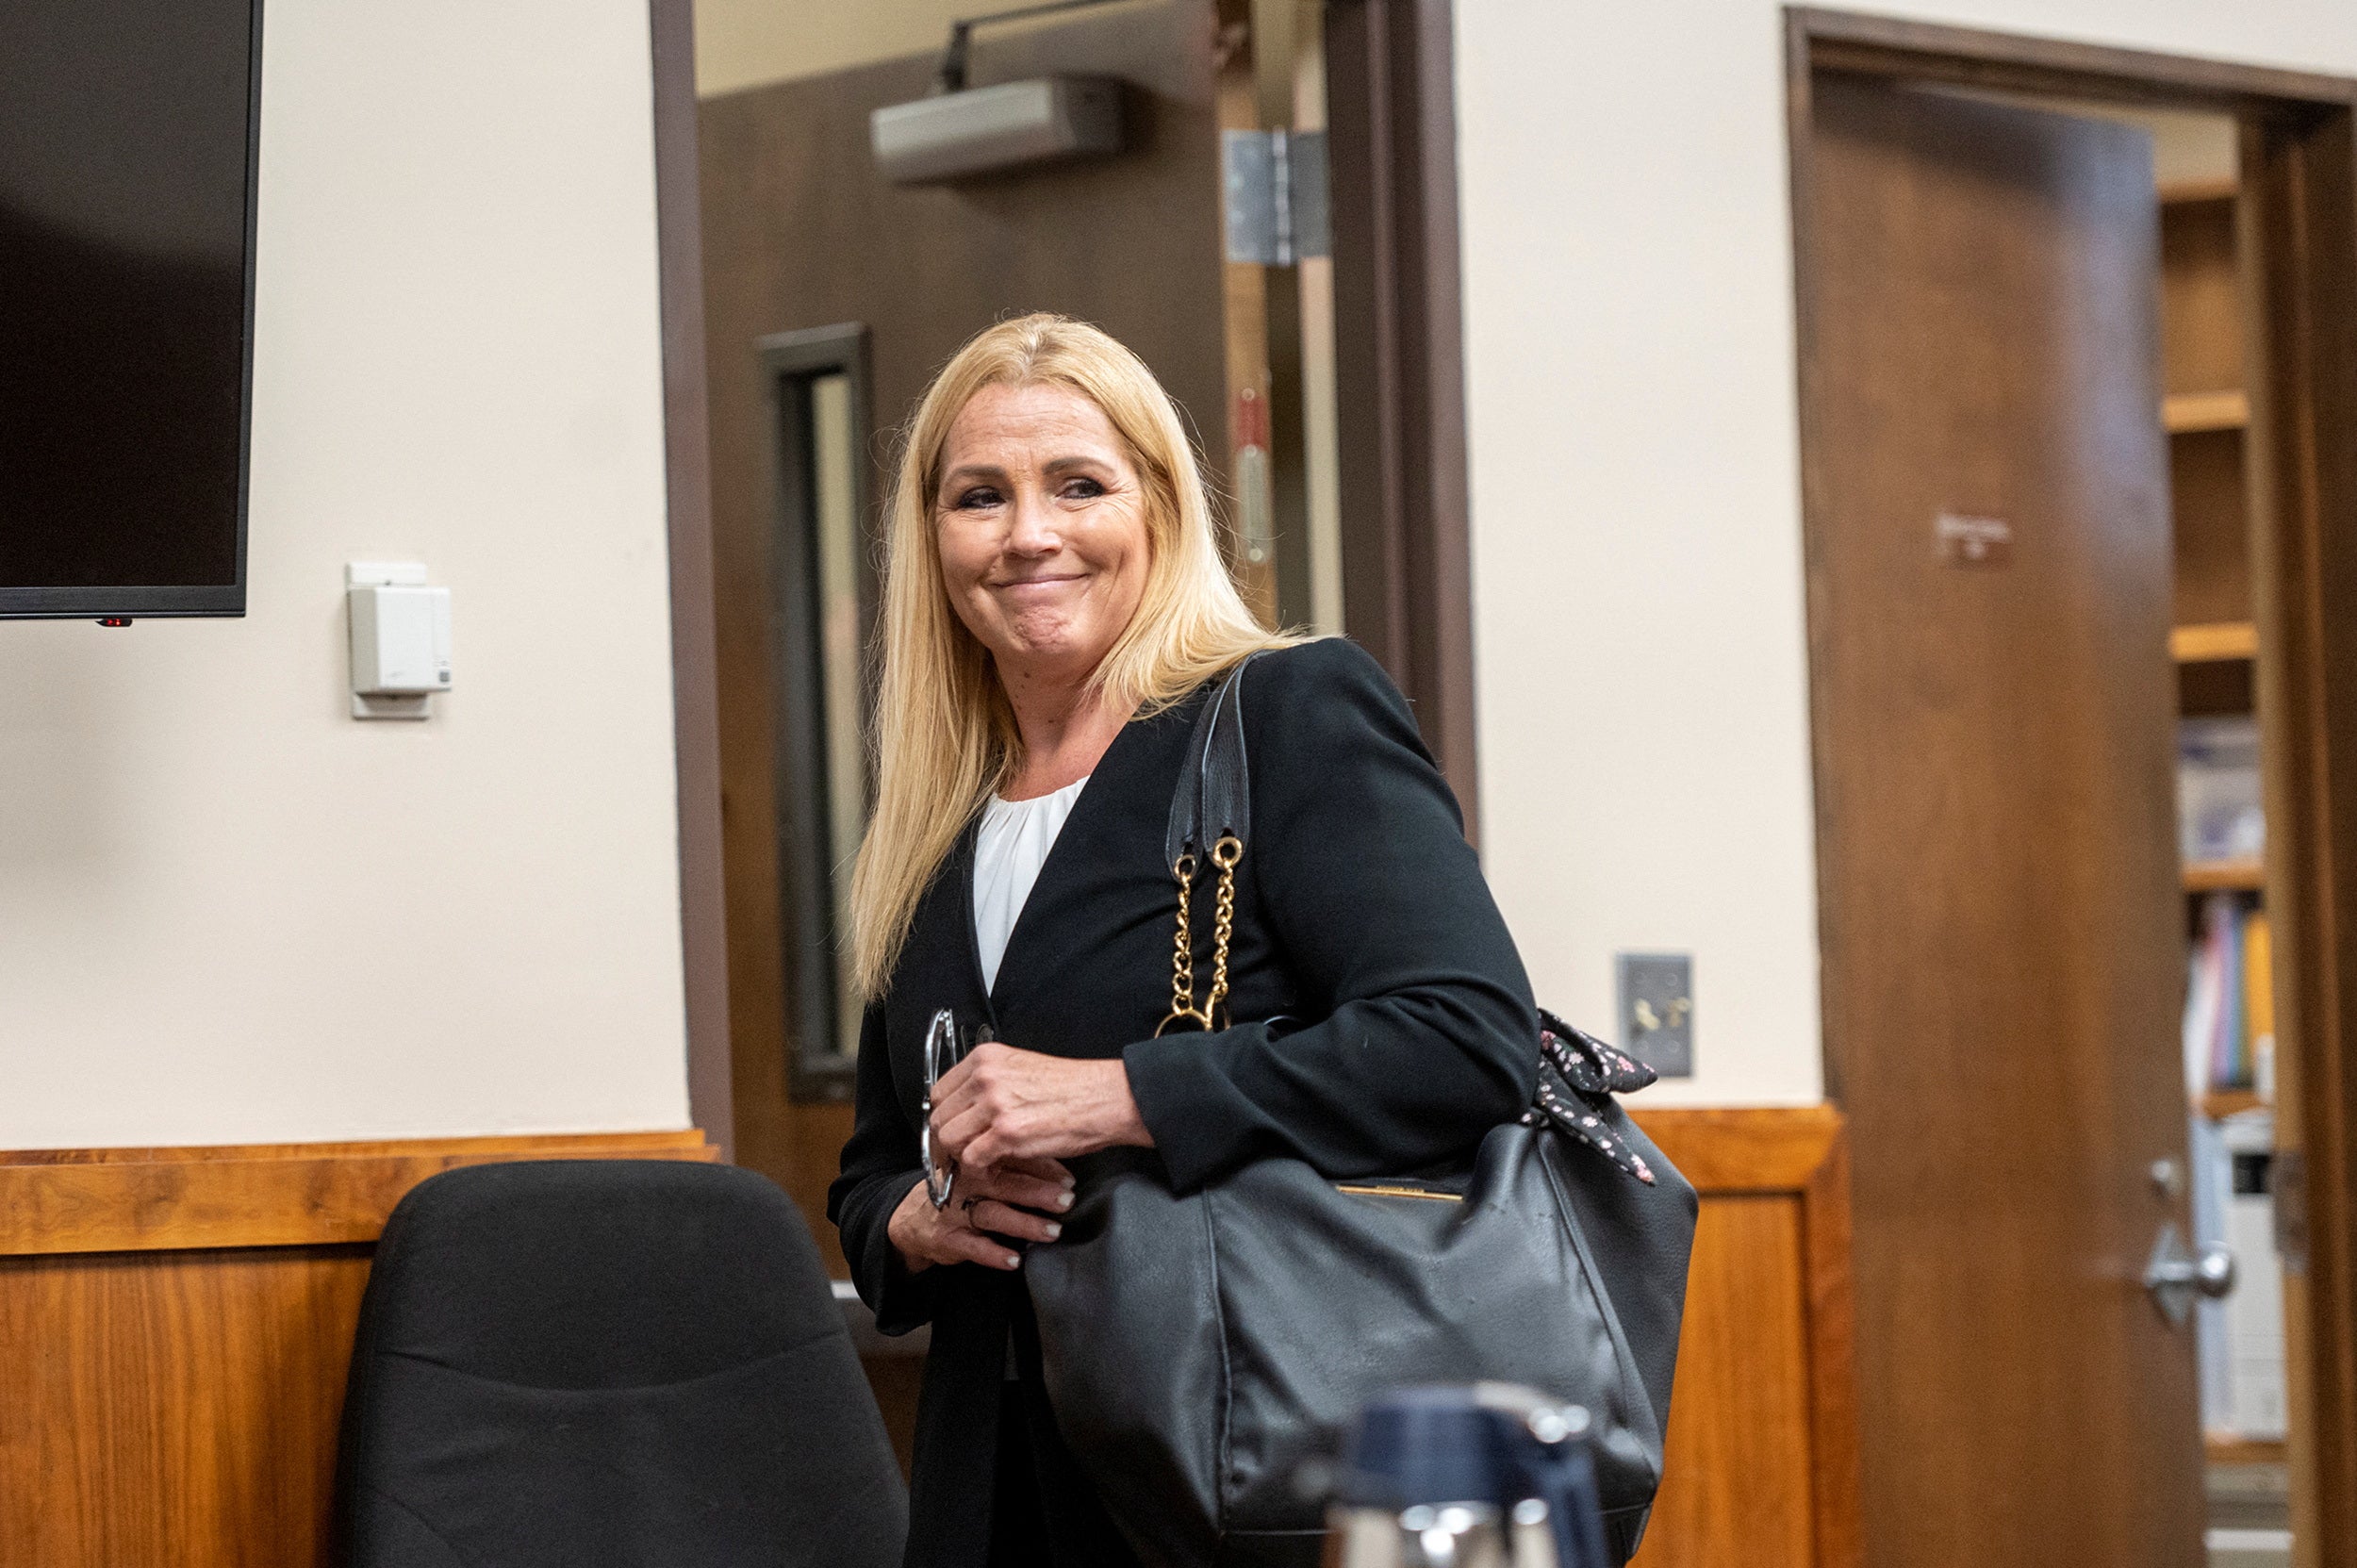 Public defender Anne Taylor enters the courtroom for Bryan Kohberger’s arraignment hearing in 2023